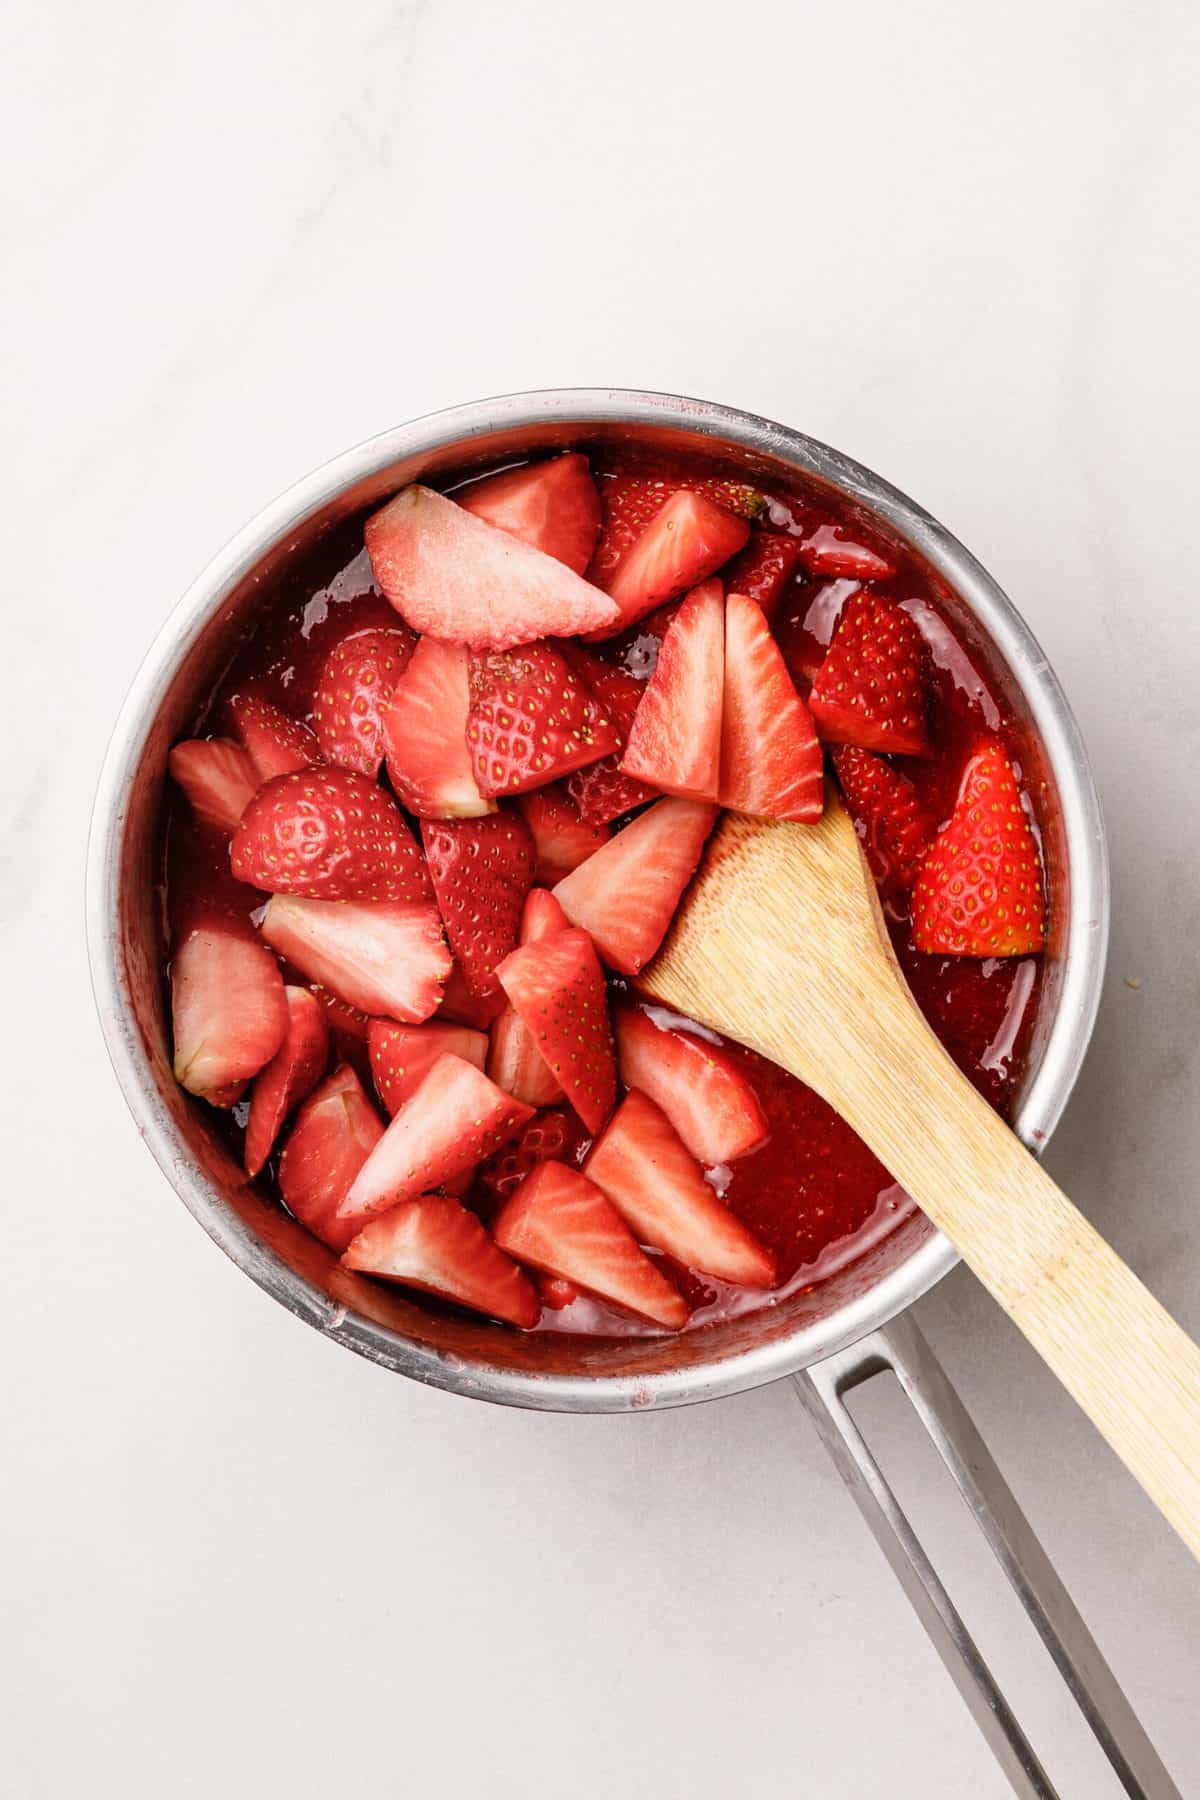 Top down images of strawberries, cooking in a saucepan.